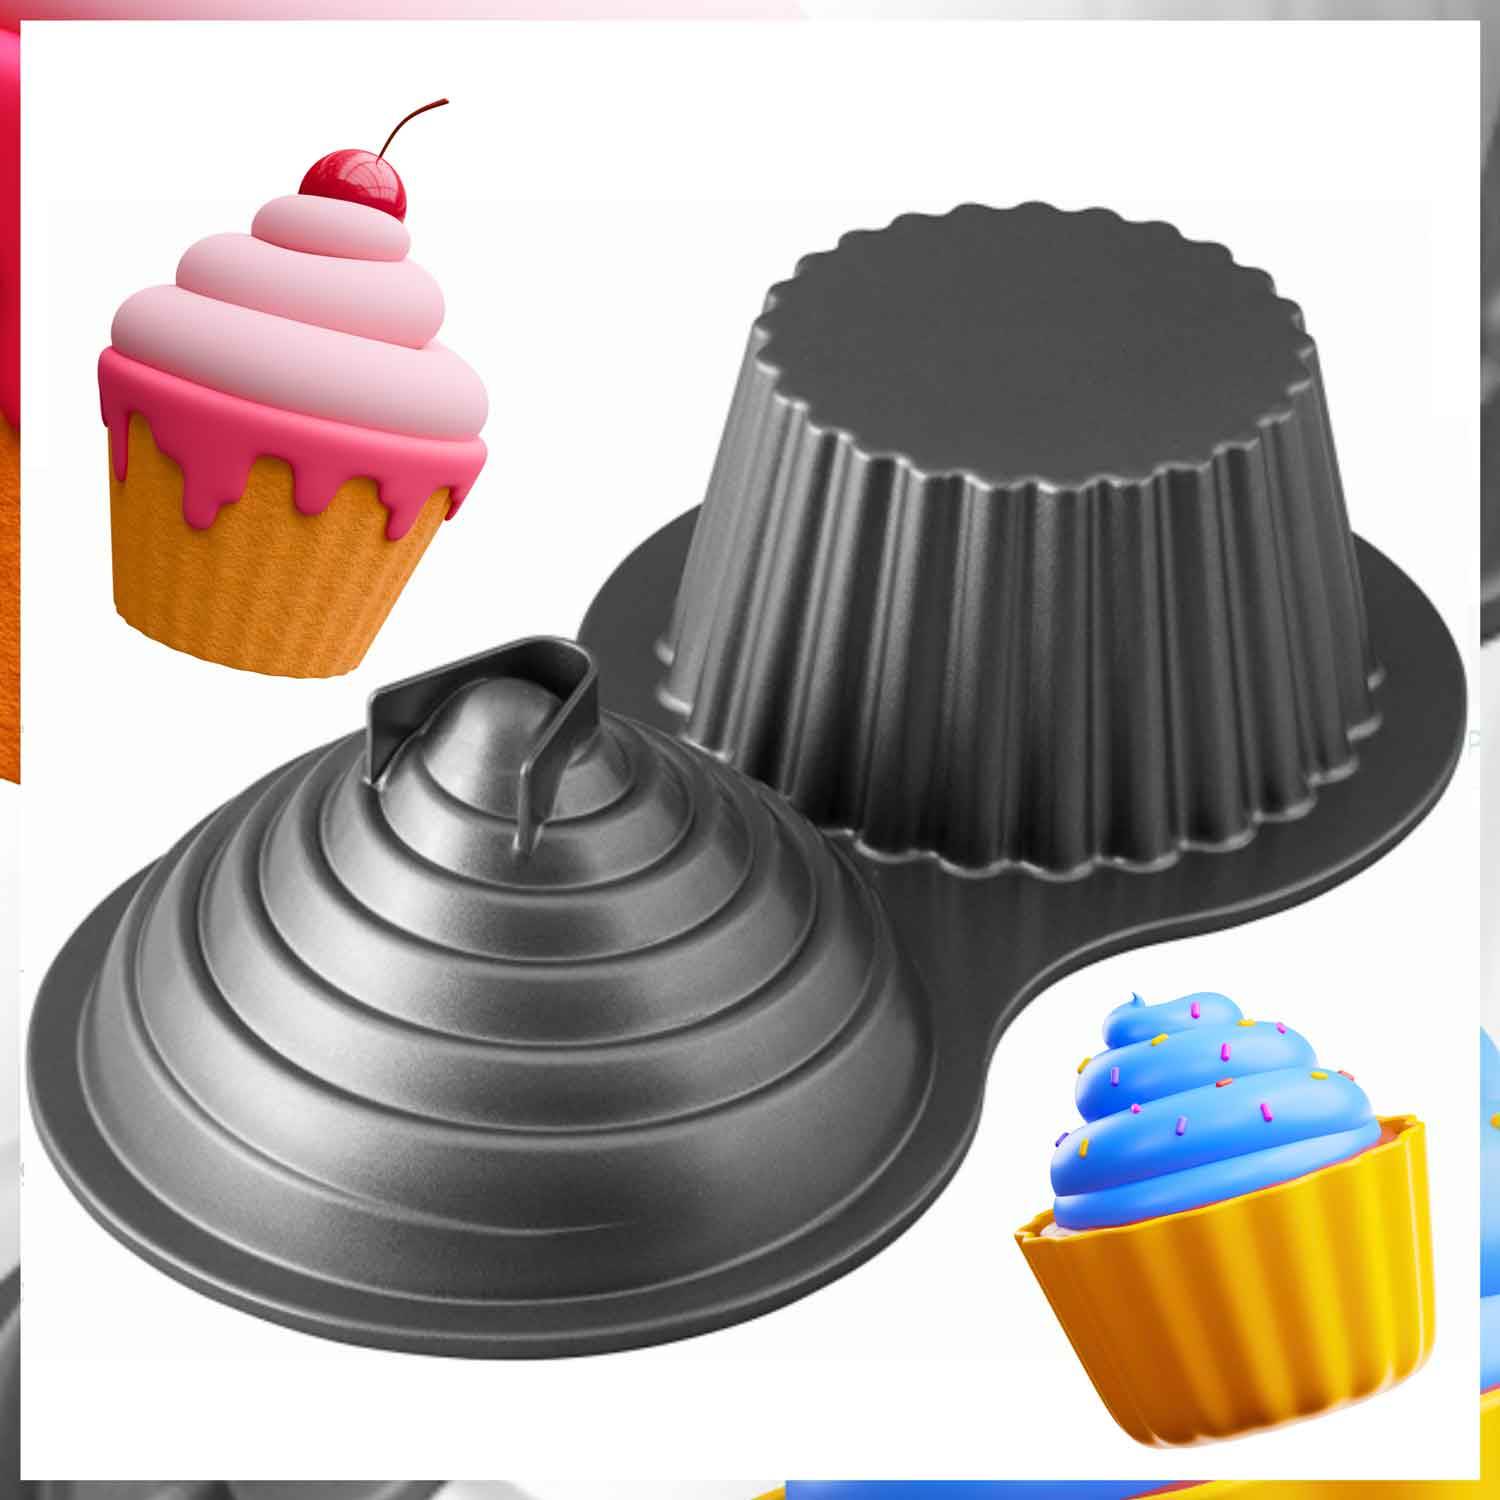 This link to the Library of Things Cupcake Pan catalog item will open in an external site and in a new tab or window